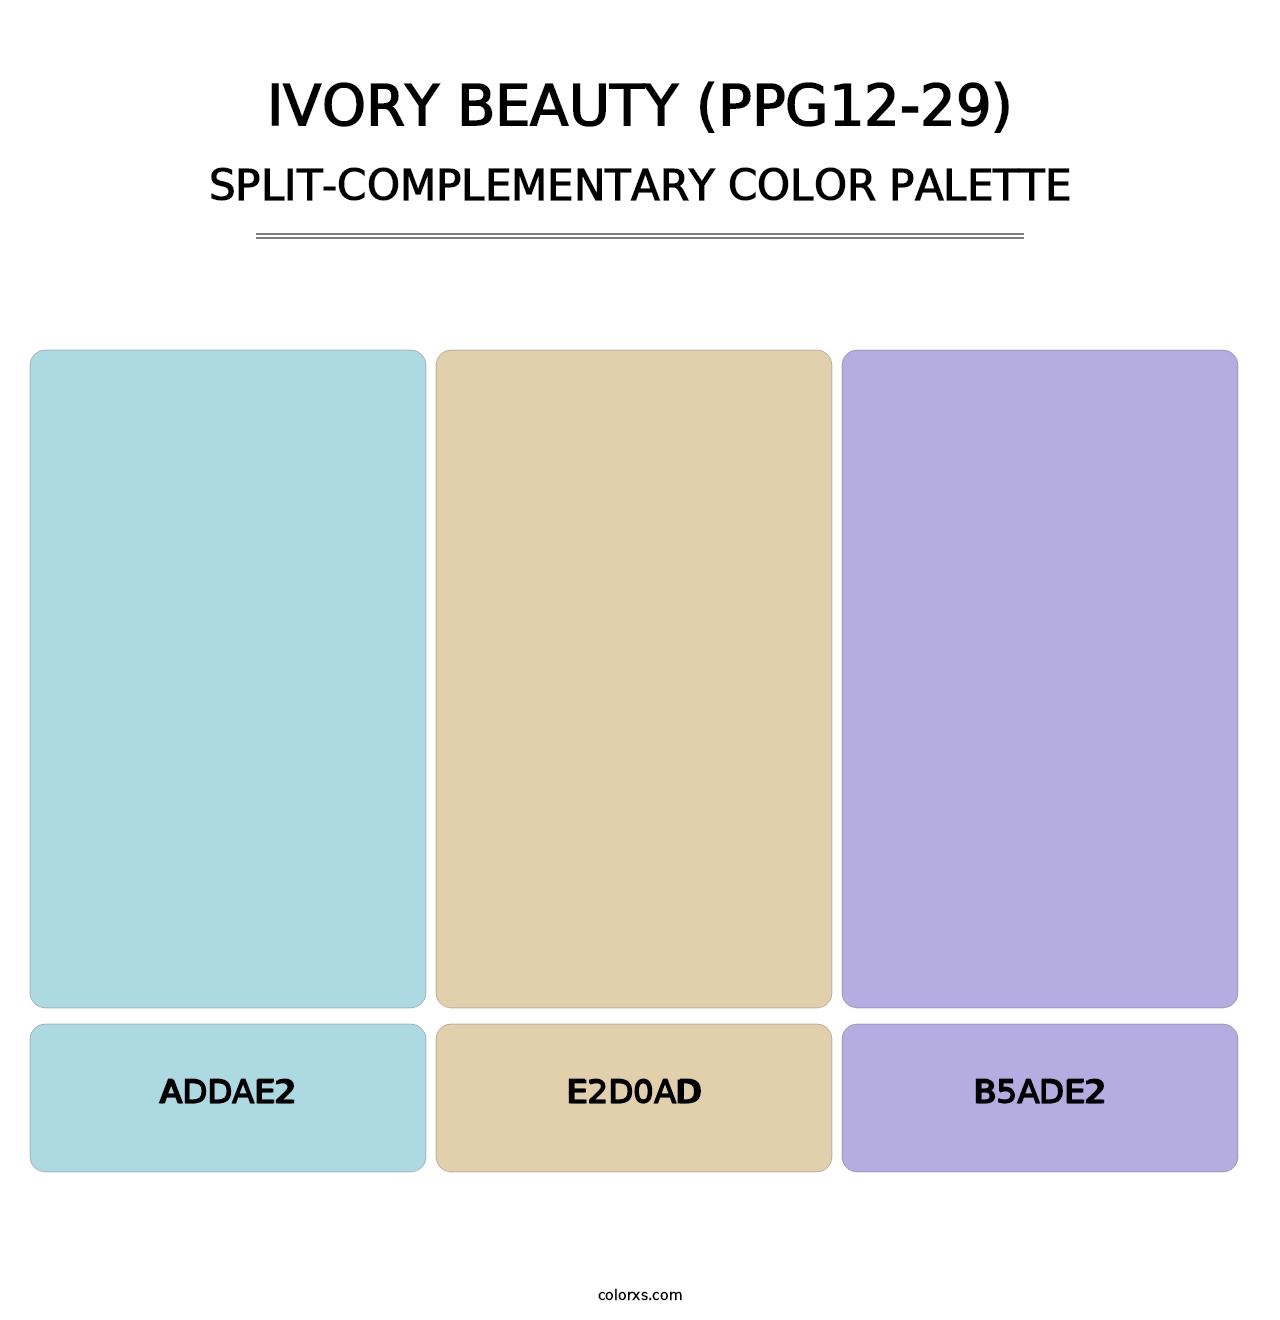 Ivory Beauty (PPG12-29) - Split-Complementary Color Palette